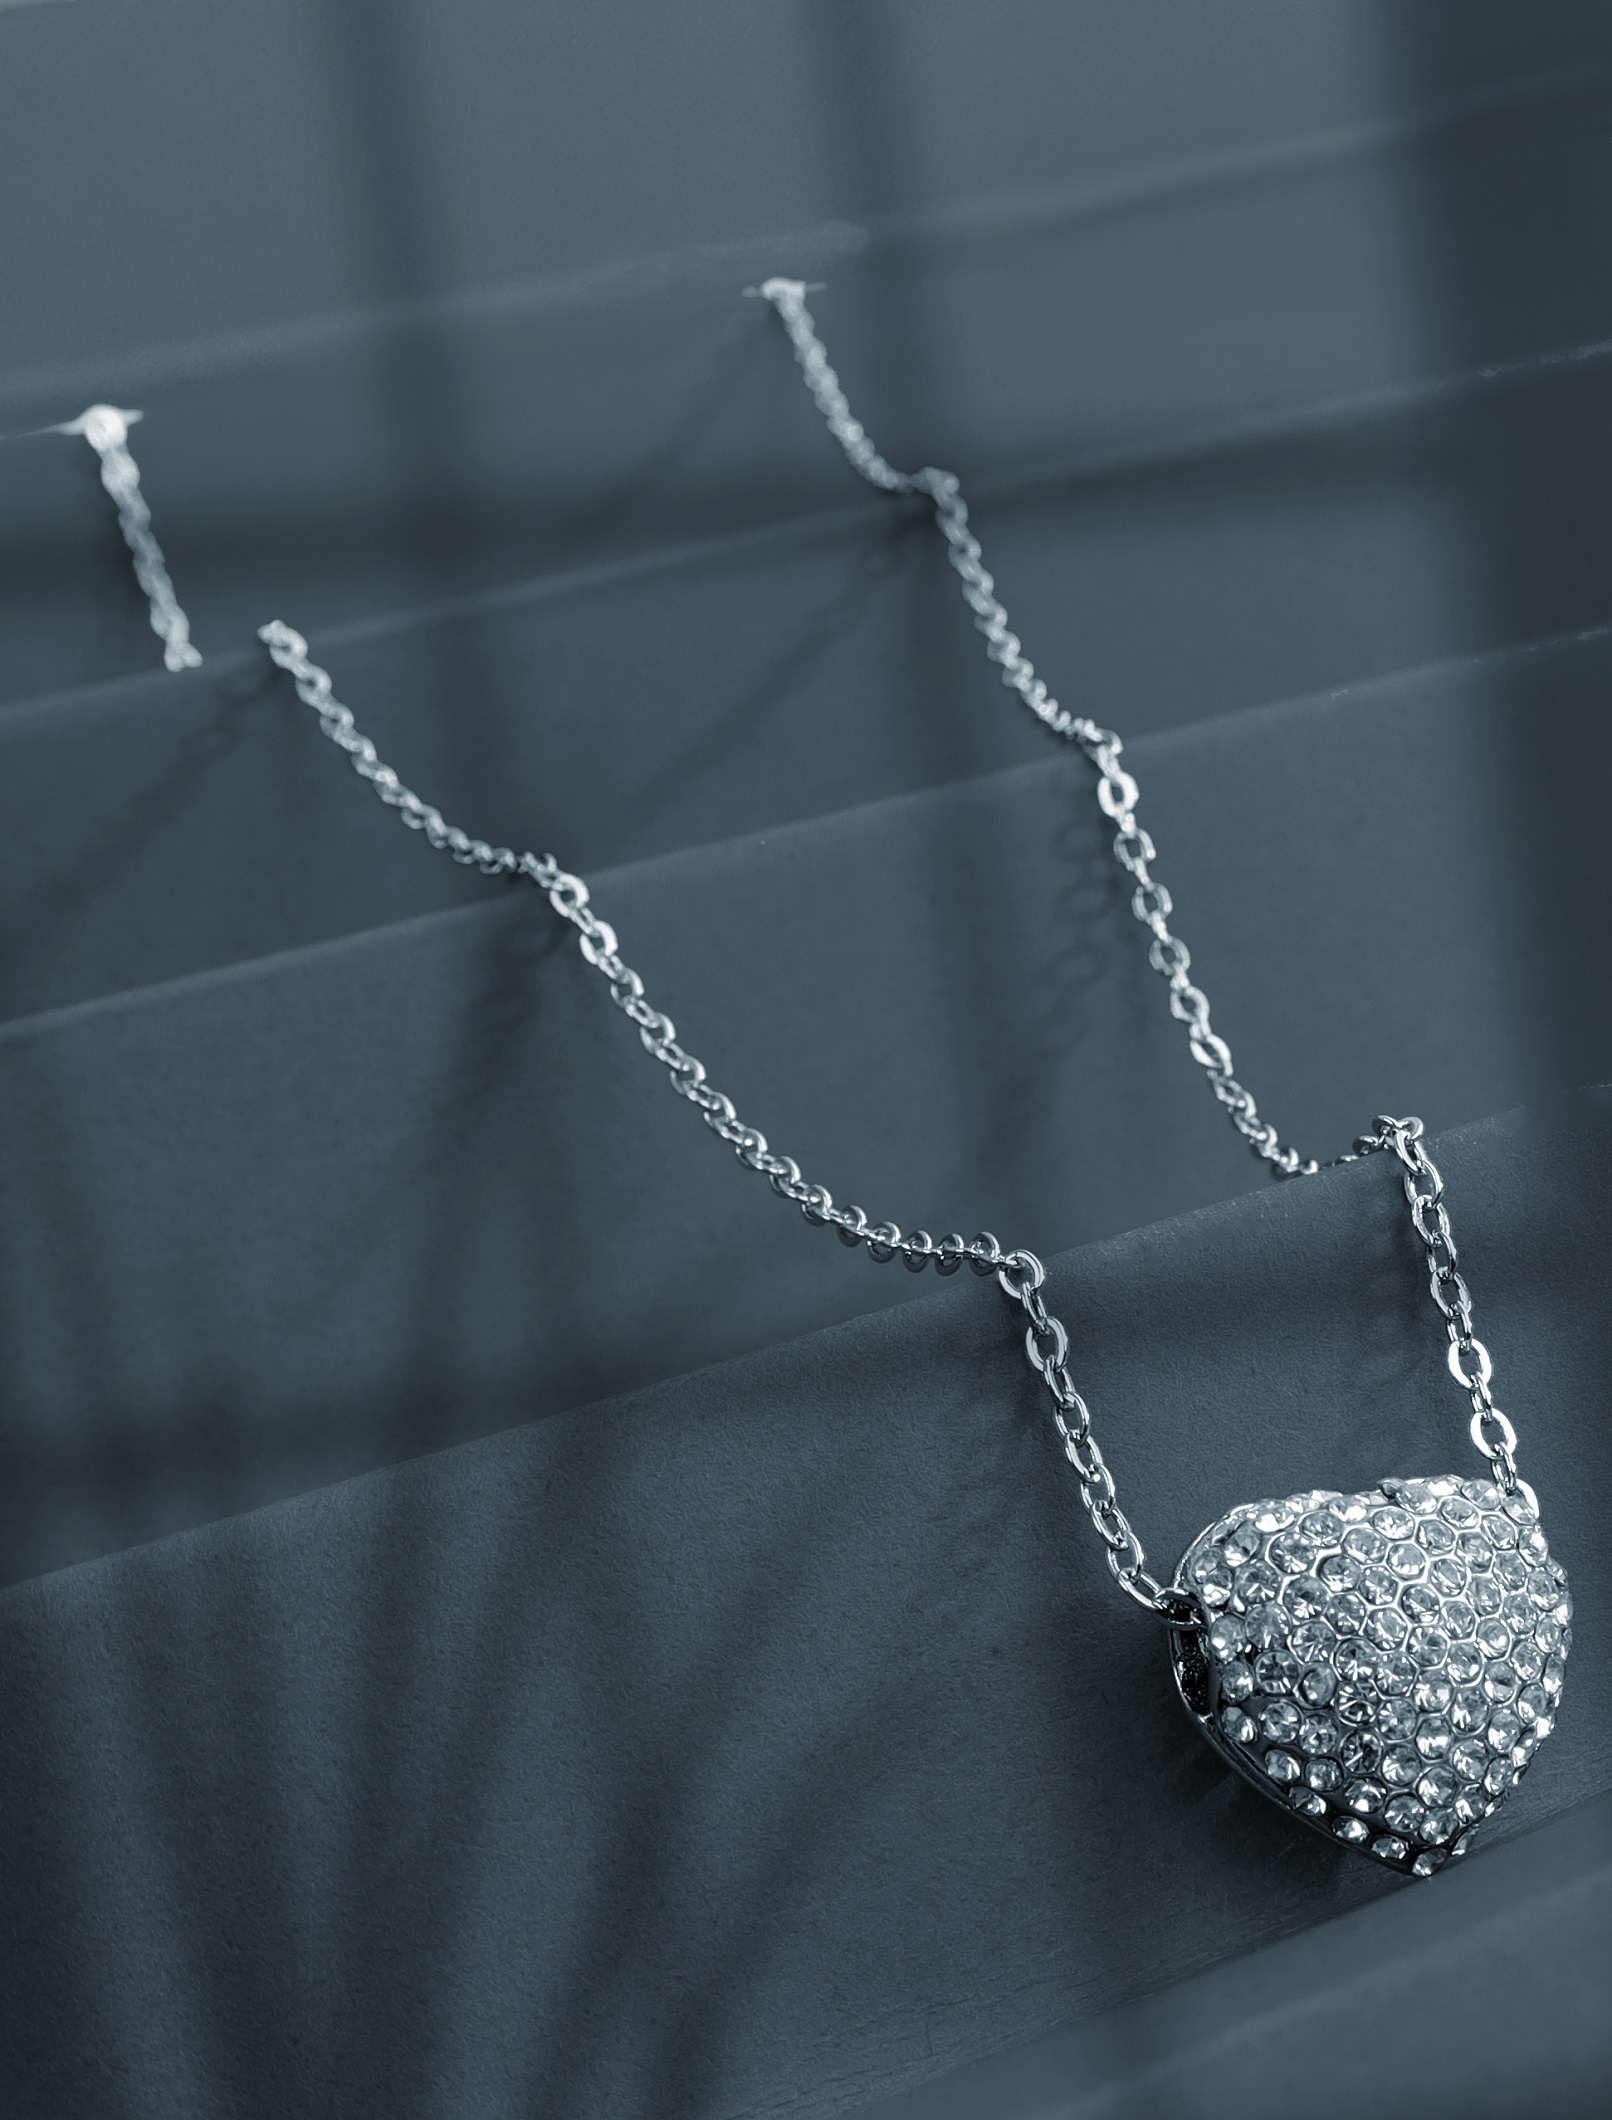 Hollow heart pendant necklace decorated with crystals